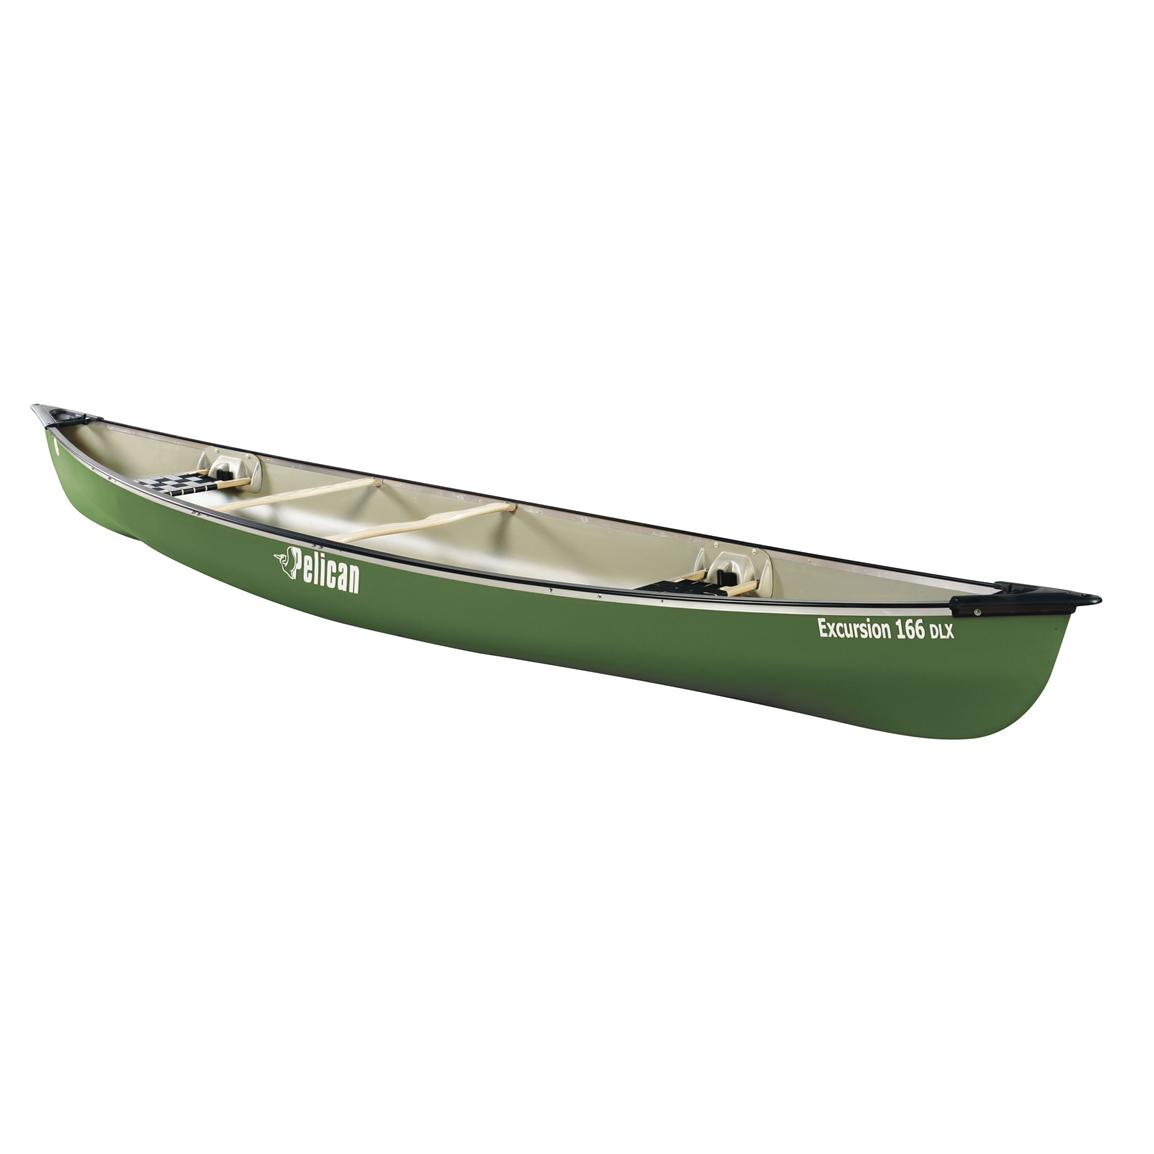 Pelican® Excursion™ 166 Deluxe Canoe - 124690, Canoes & Kayaks at Sportsman's Guide1154 x 1154